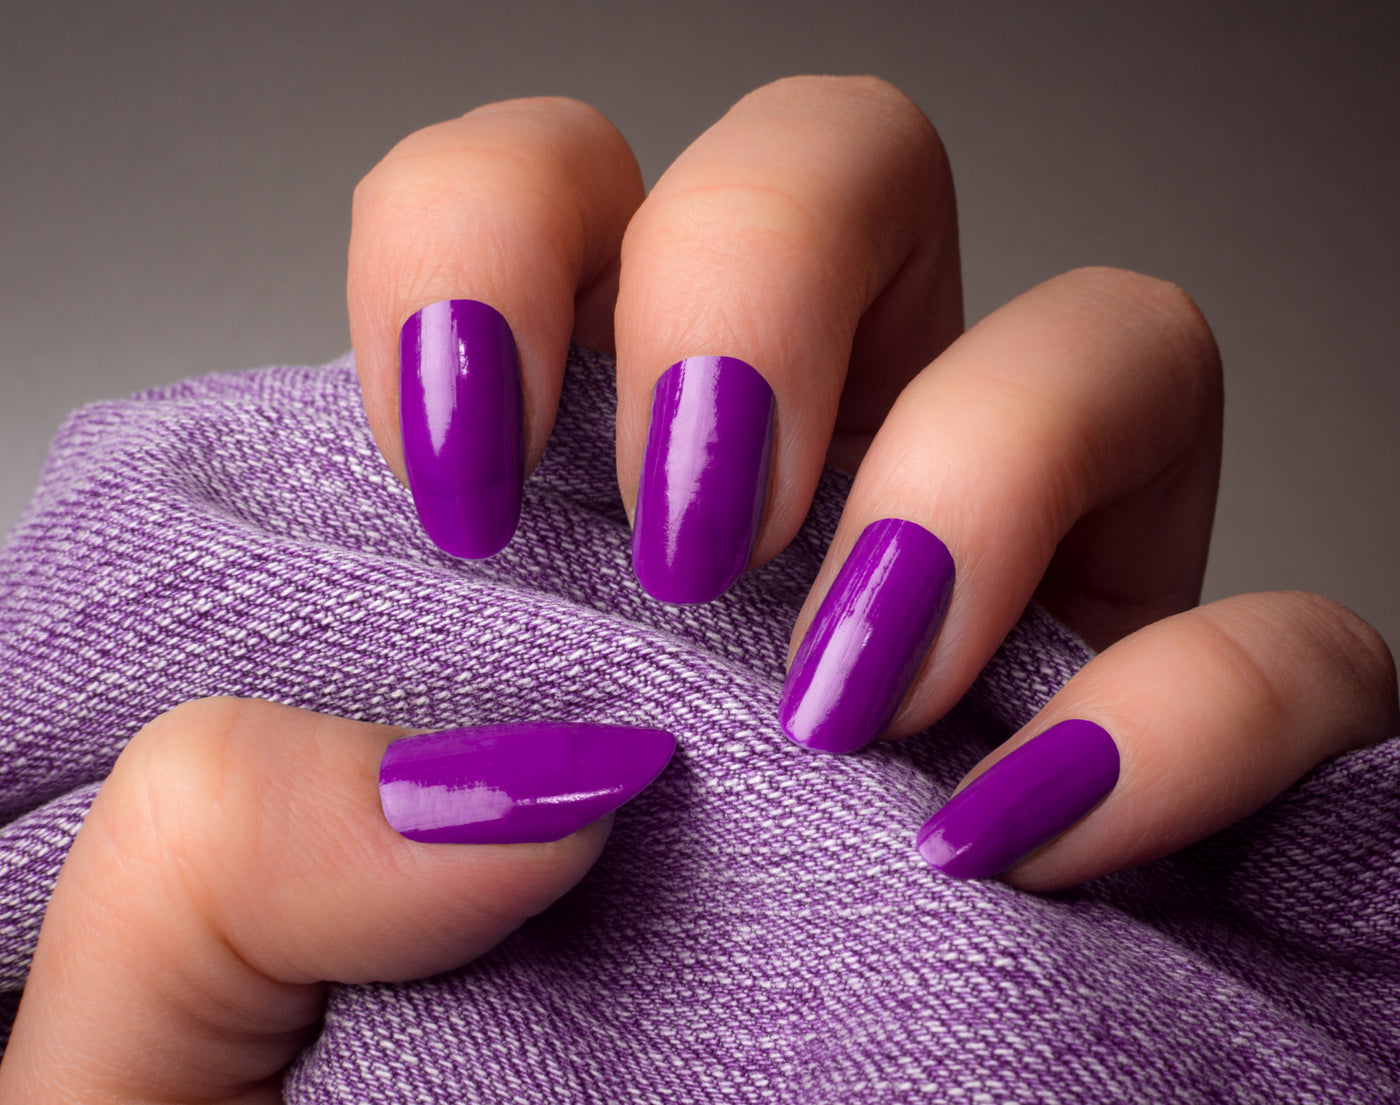 Nail Salons Near Me in New Haven | Best Nail Places & Nail Shops in New  Haven, CT!